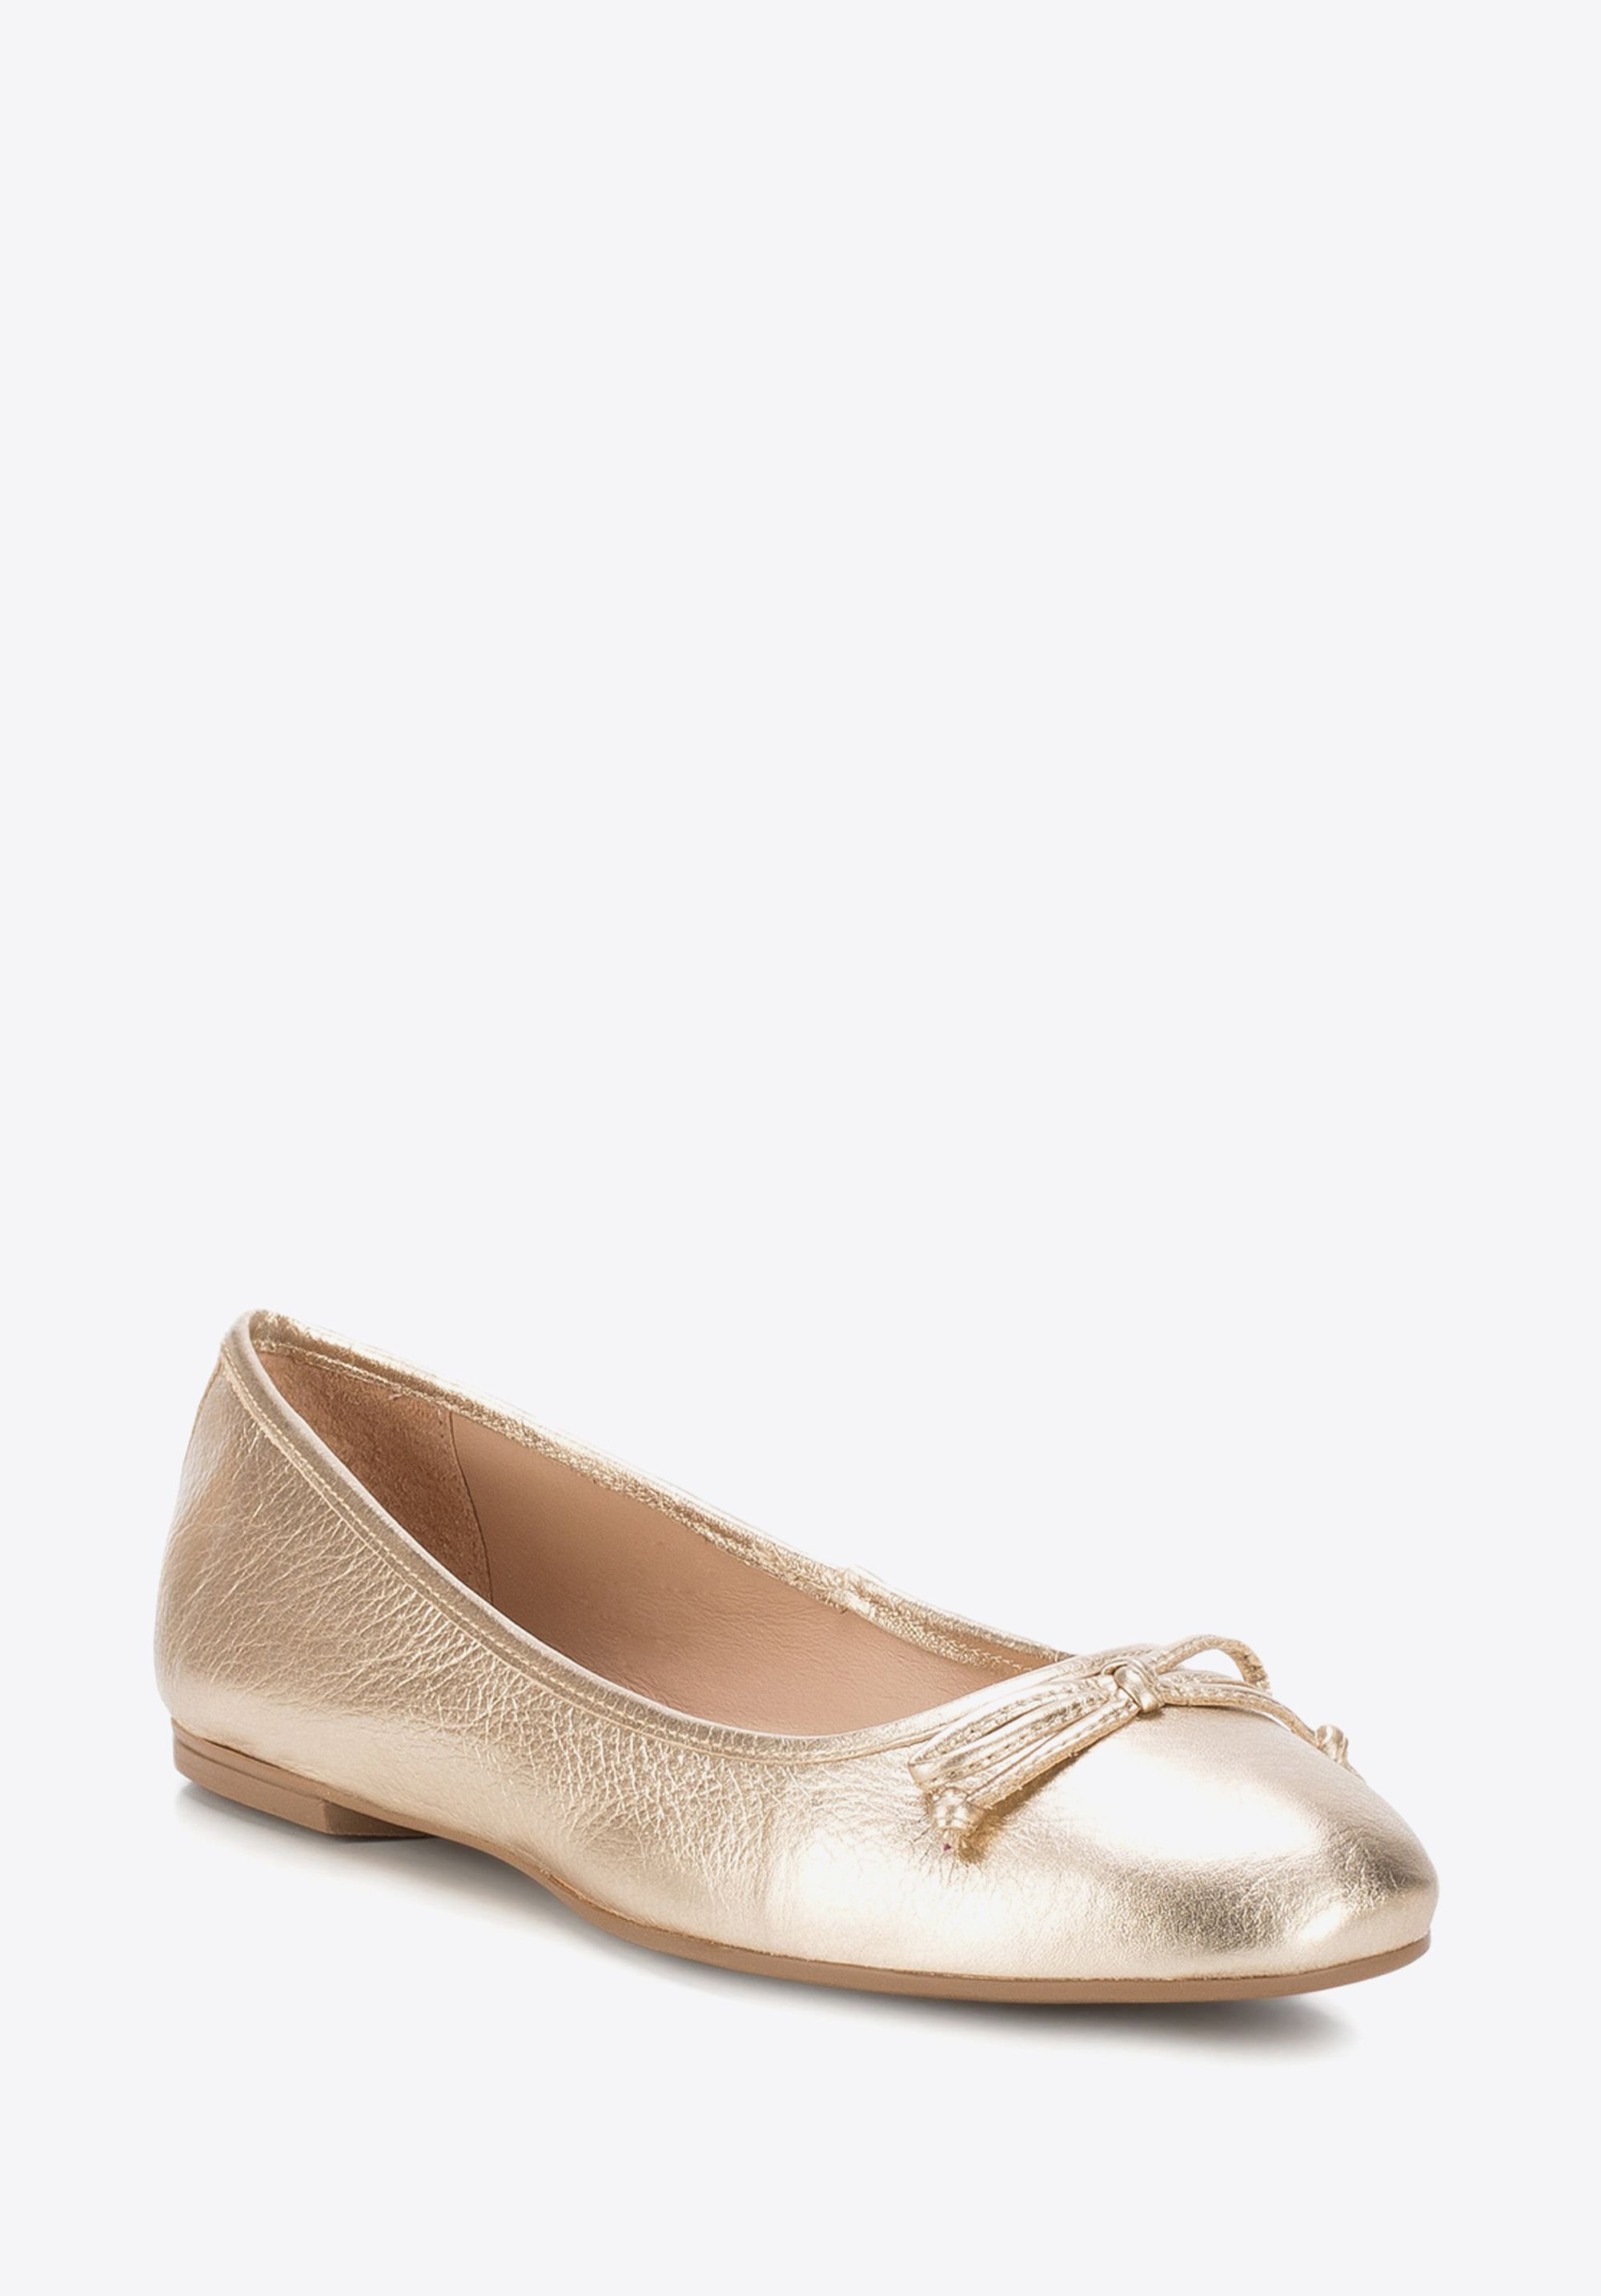 Bow detail ballerina shoes from grain leather | WITTCHEN | 88-D-258